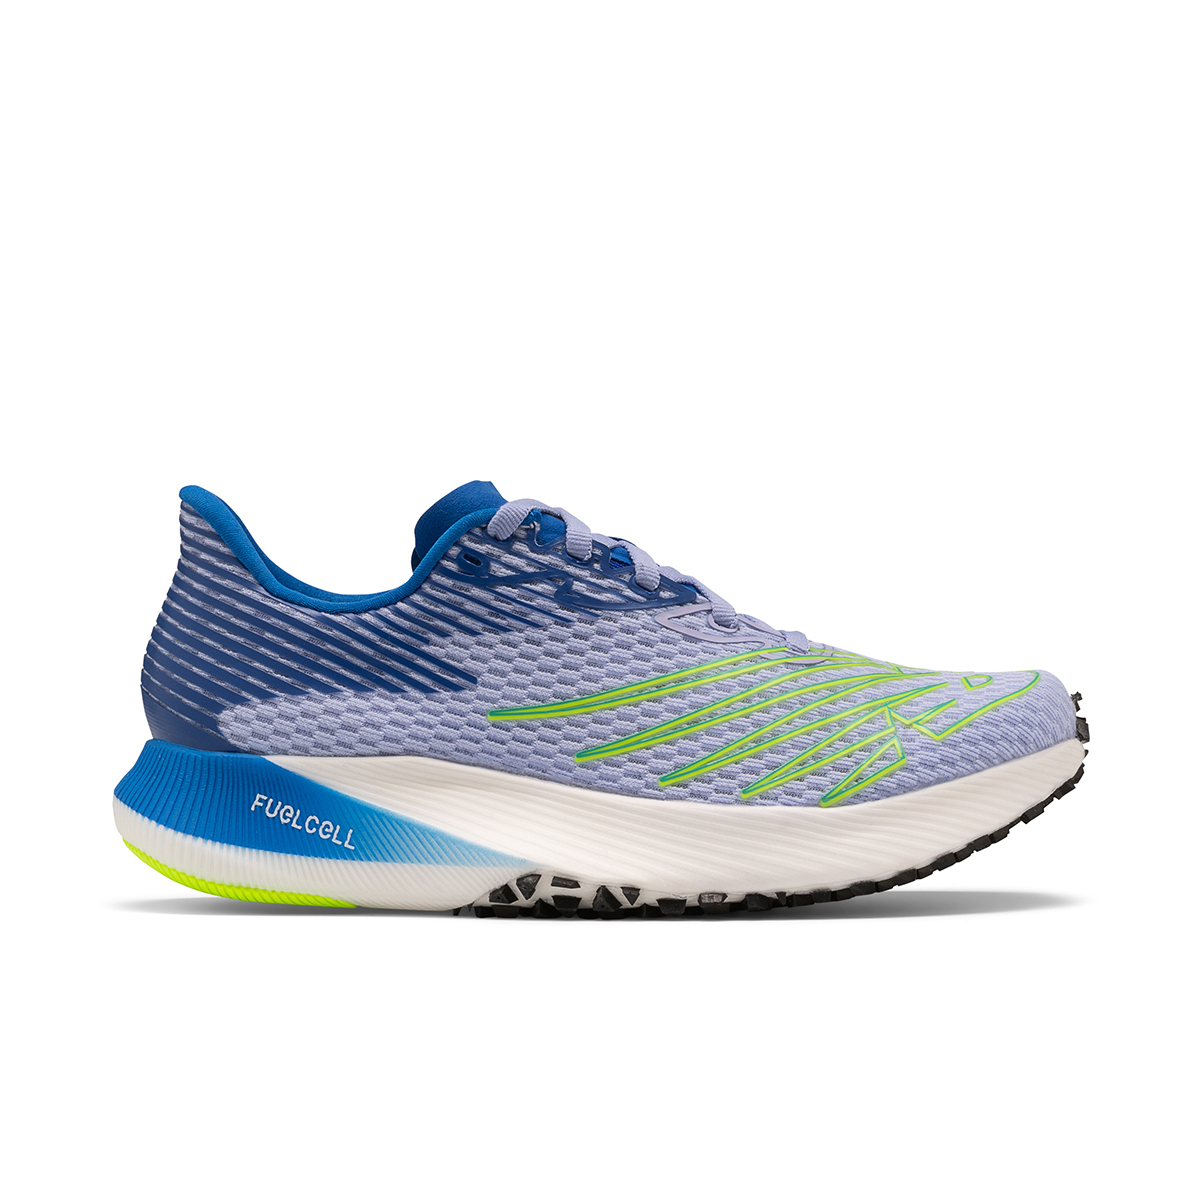 New Balance Fuel Cell Elite, , large image number null